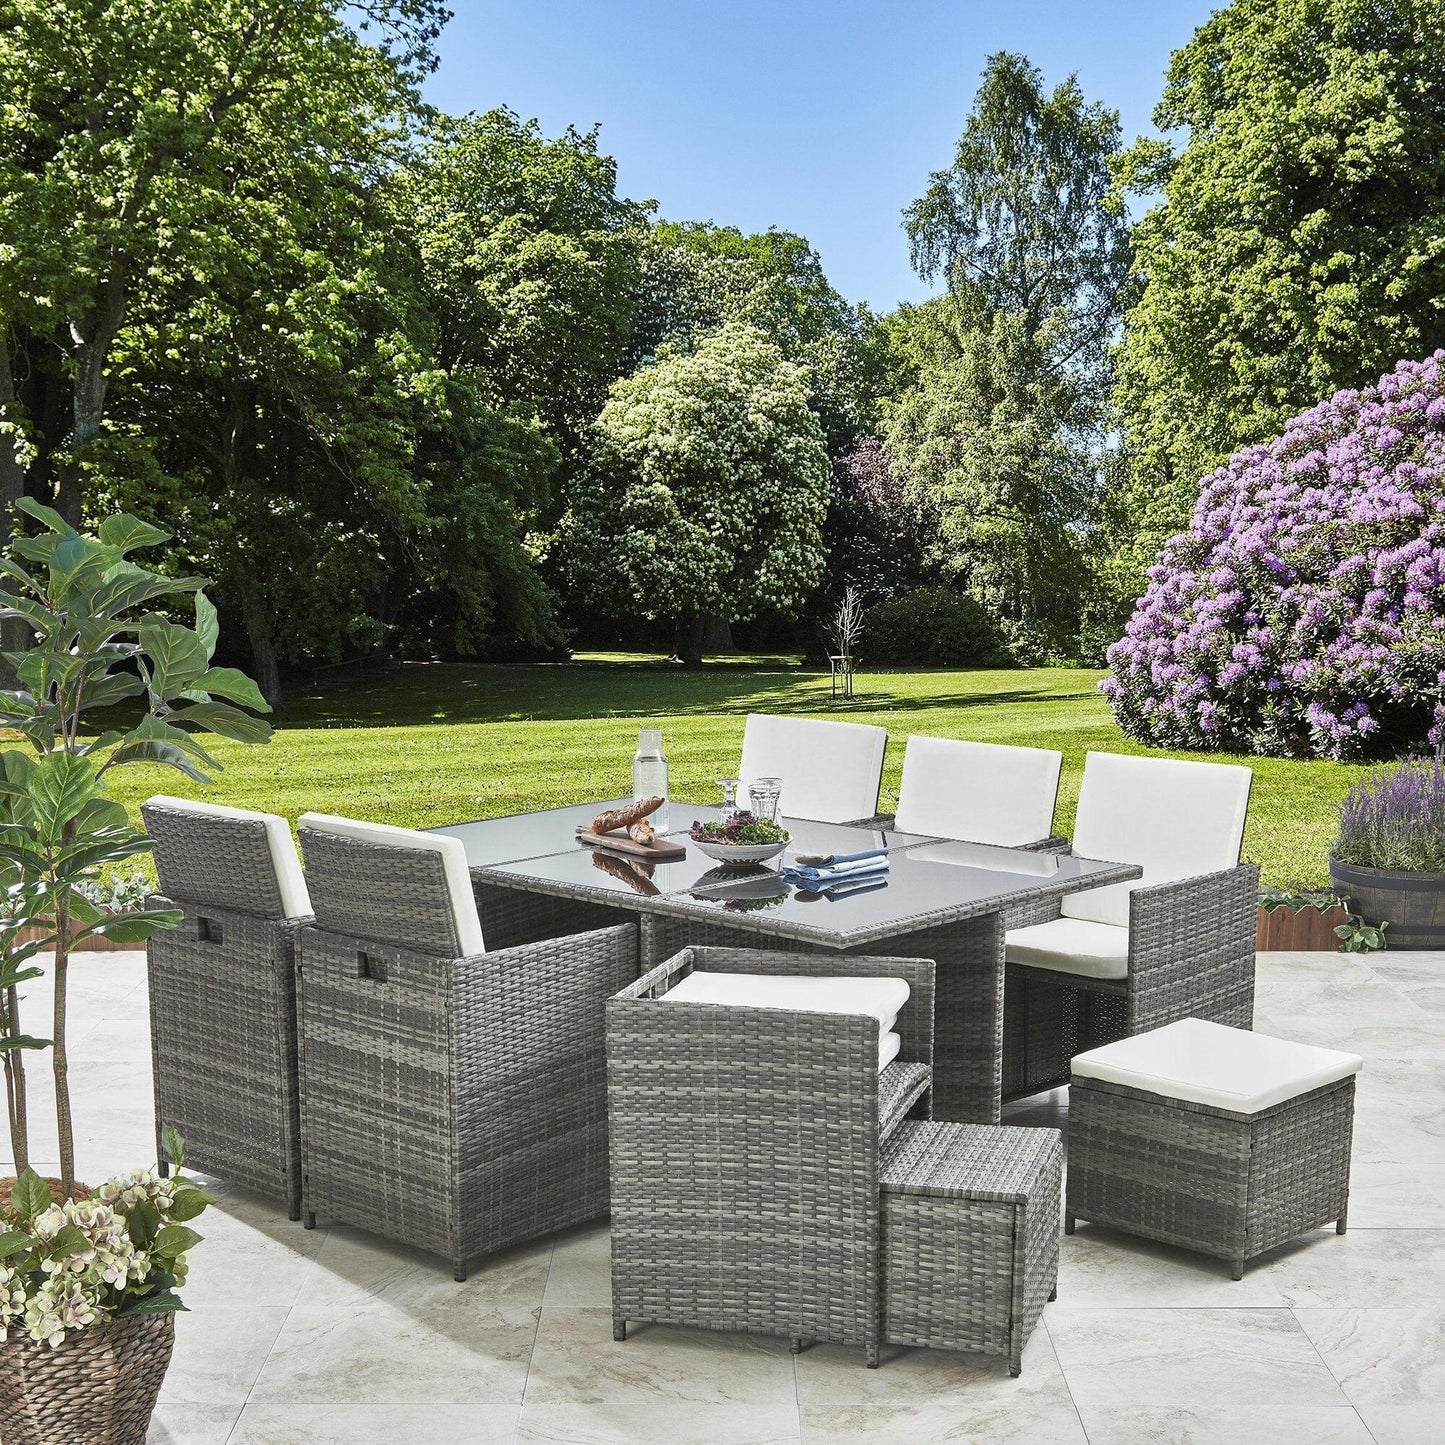 10 Seater Rattan Cube Outdoor Dining Set - Grey Weave Cream Cushions